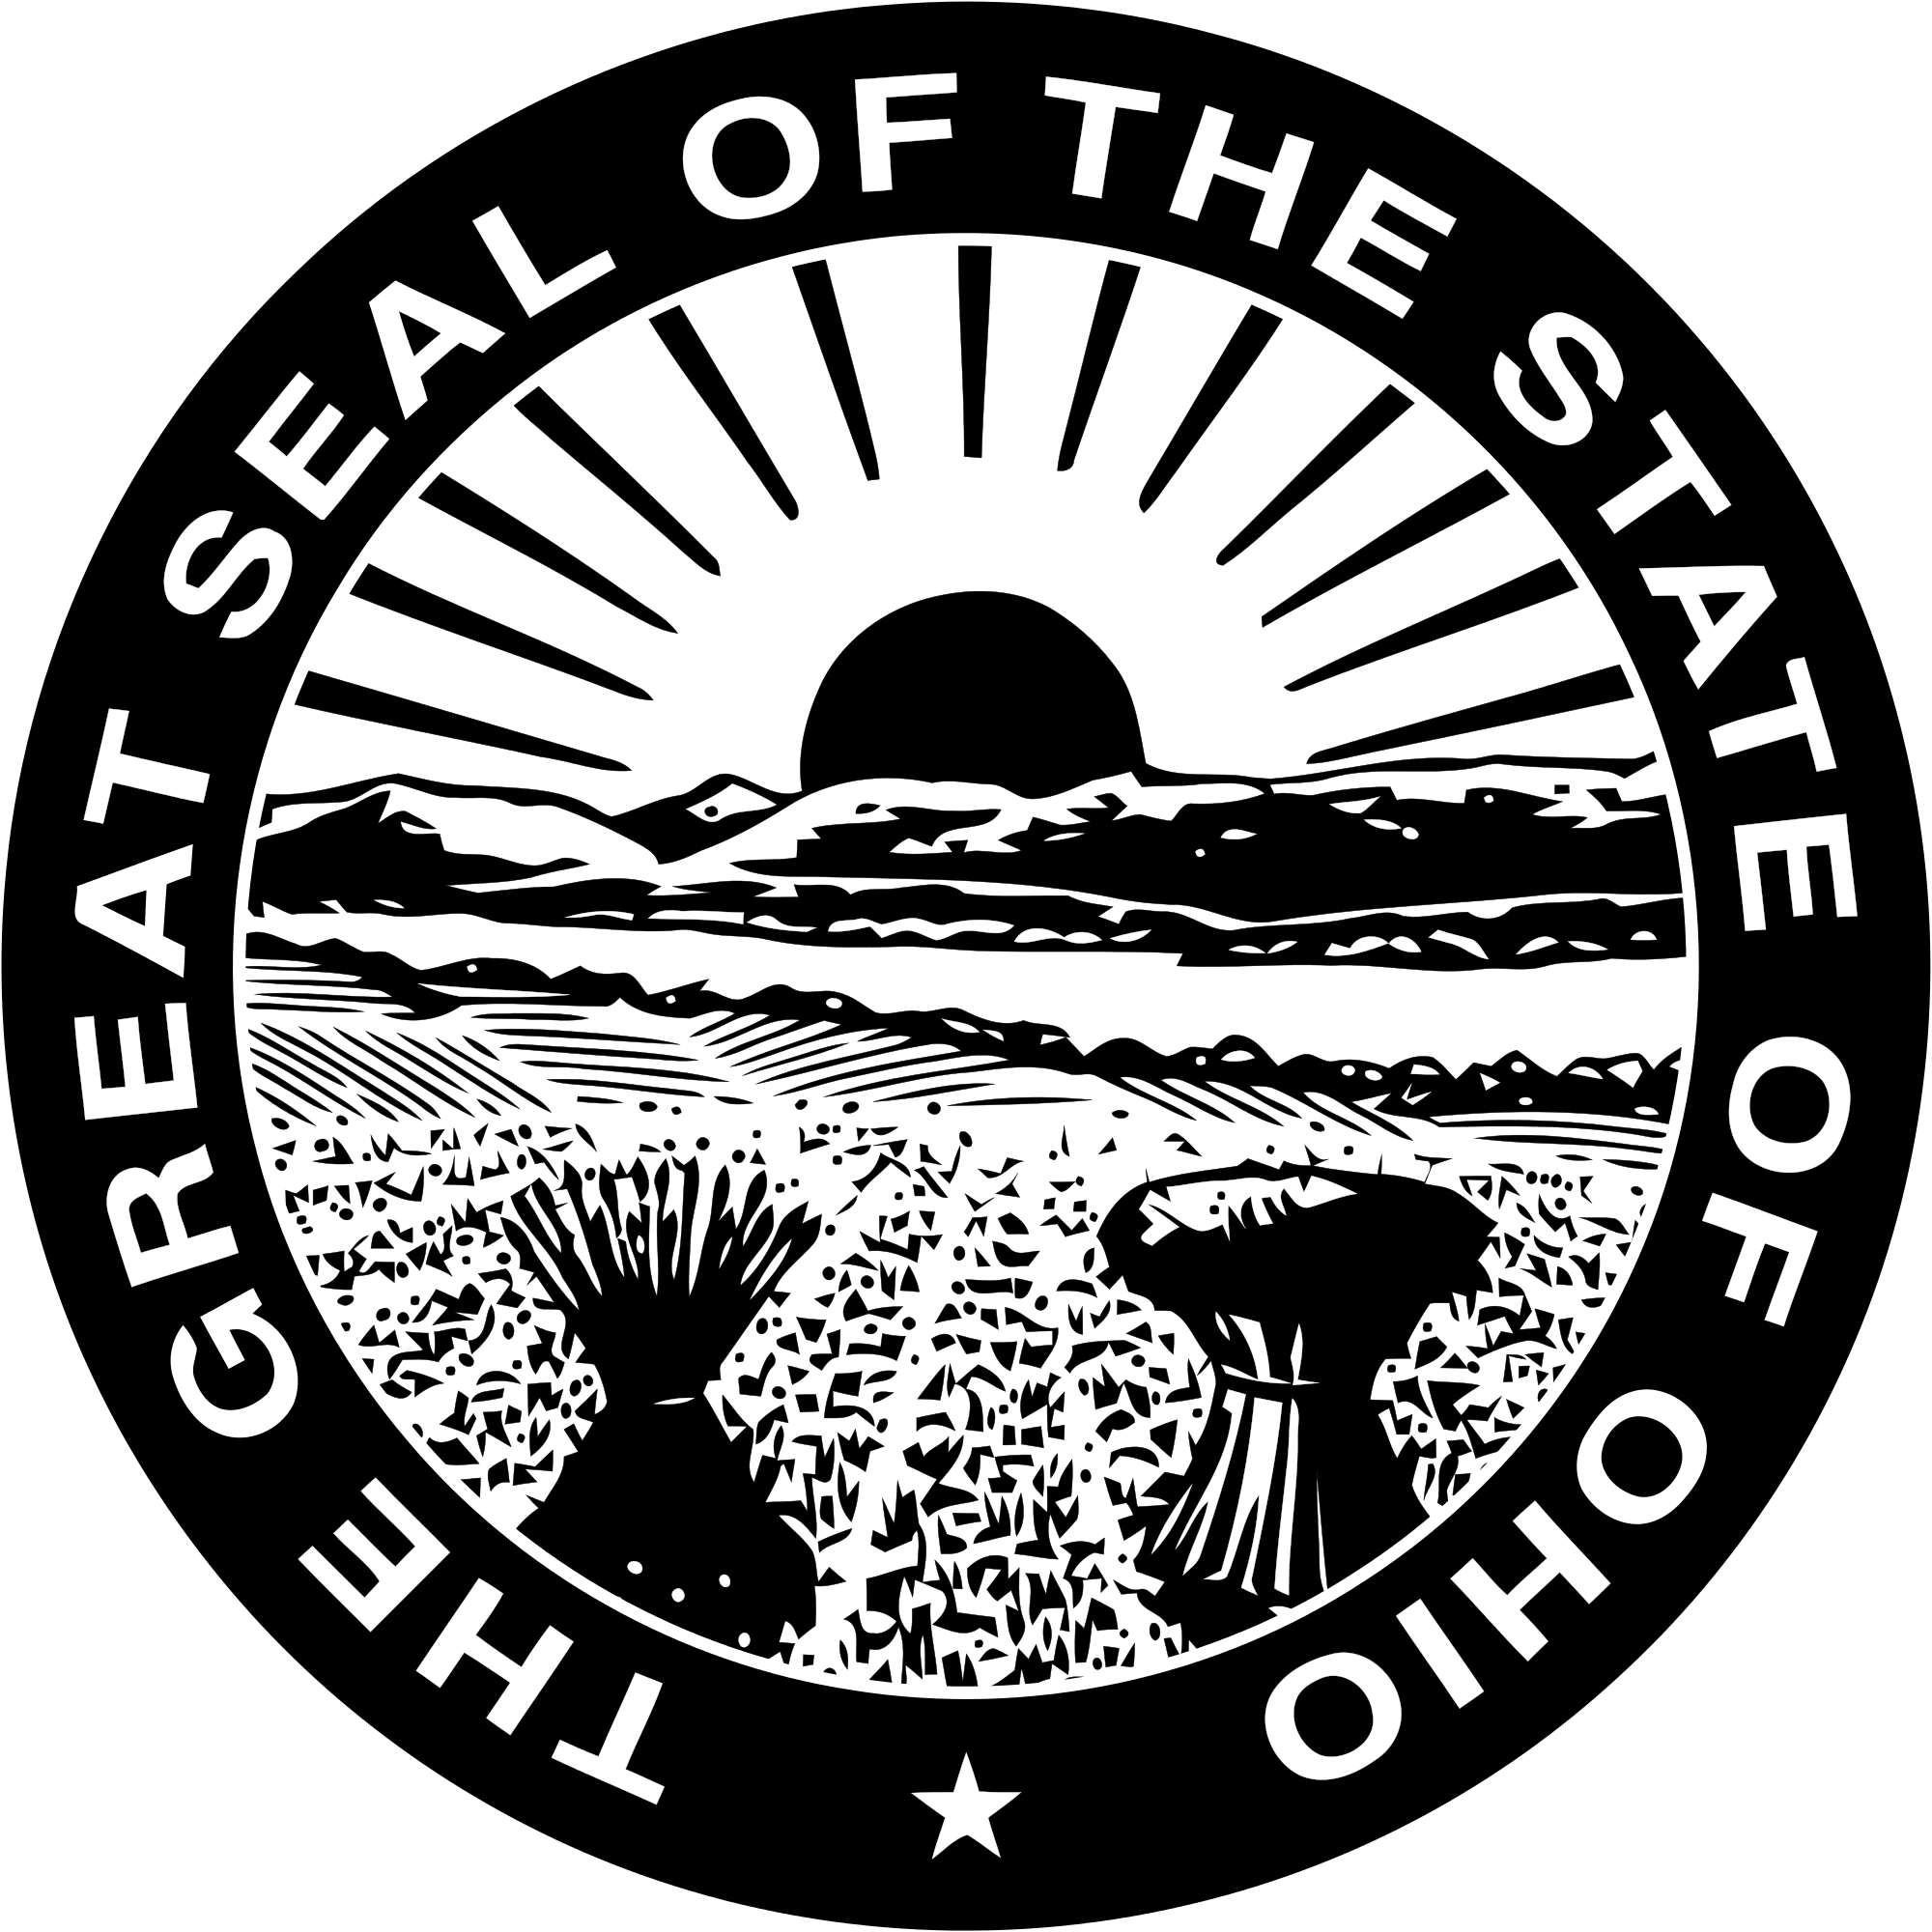 Ohio State Information Symbols Capital Constitution - Great Seal Of The State Of Ohio (1200x1200)